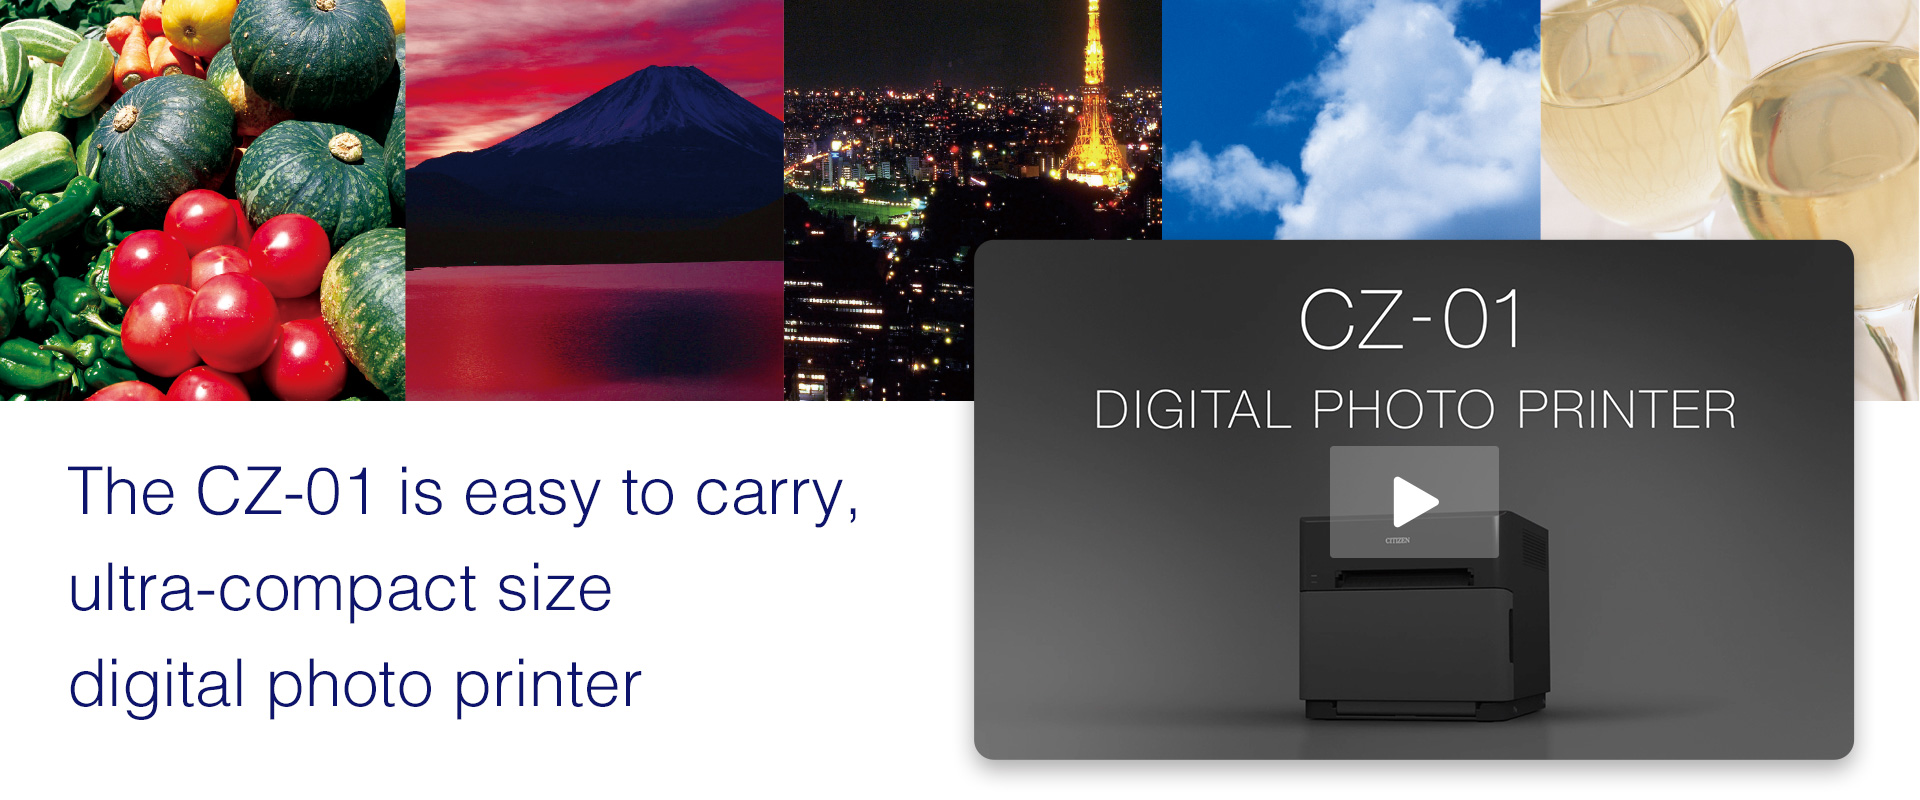 Easy to carry, ultra-compact size digital photo printer